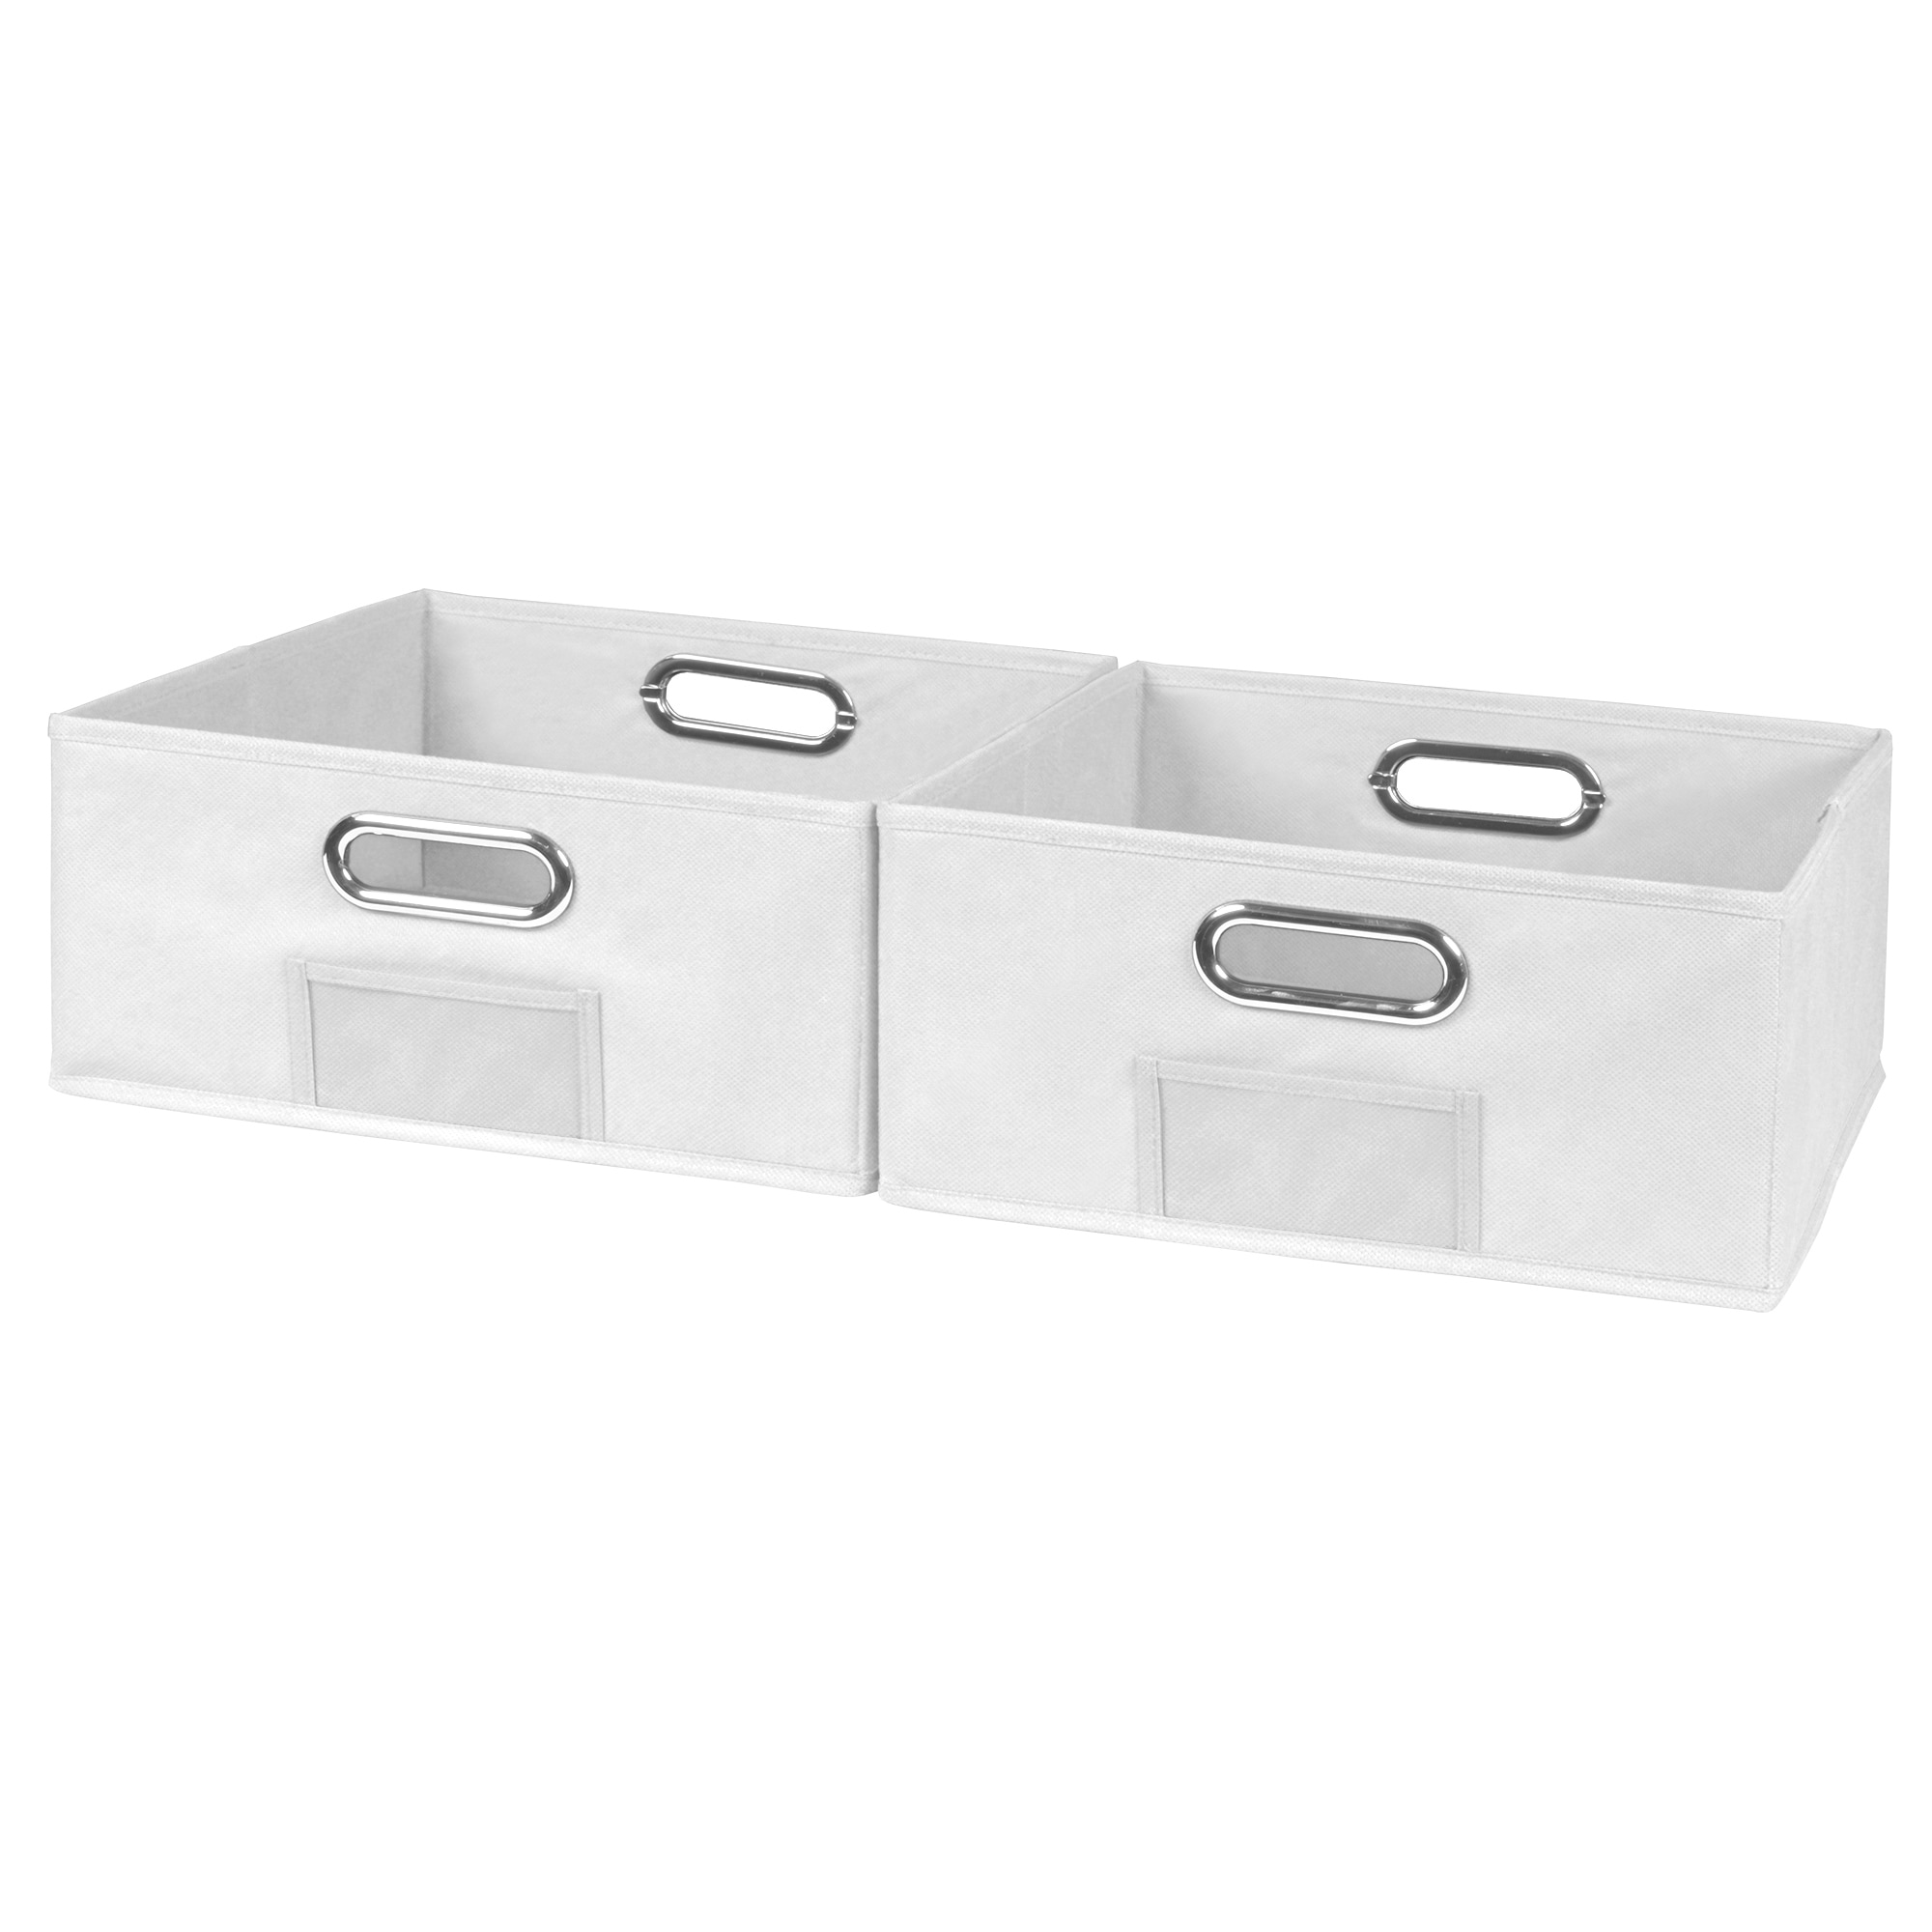 Noble Connect Set of 2 Half Size Foldable Fabric Storage Bins White